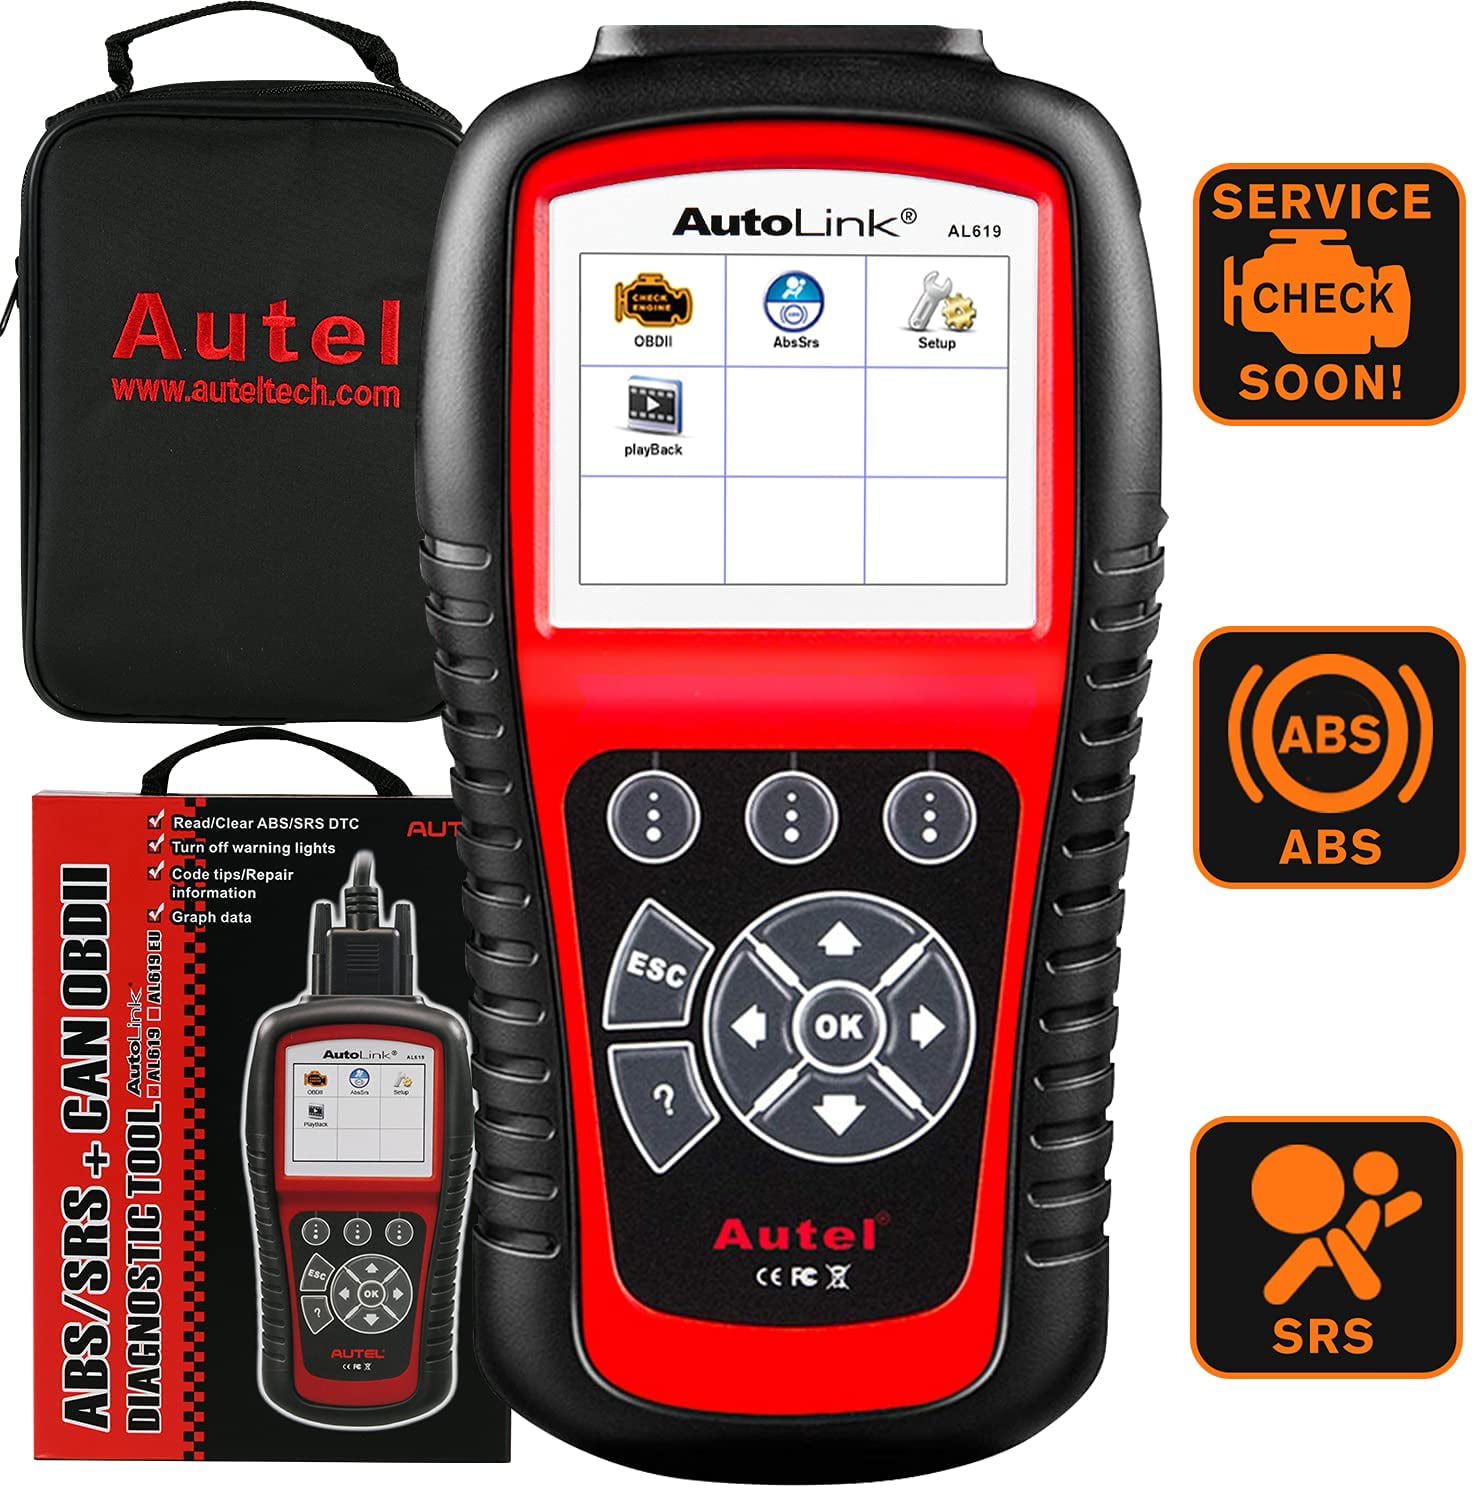 Autel ML629 Auto Diagnostic Tool OBD2 Code Reader for ABS SRS Transmission MD802 